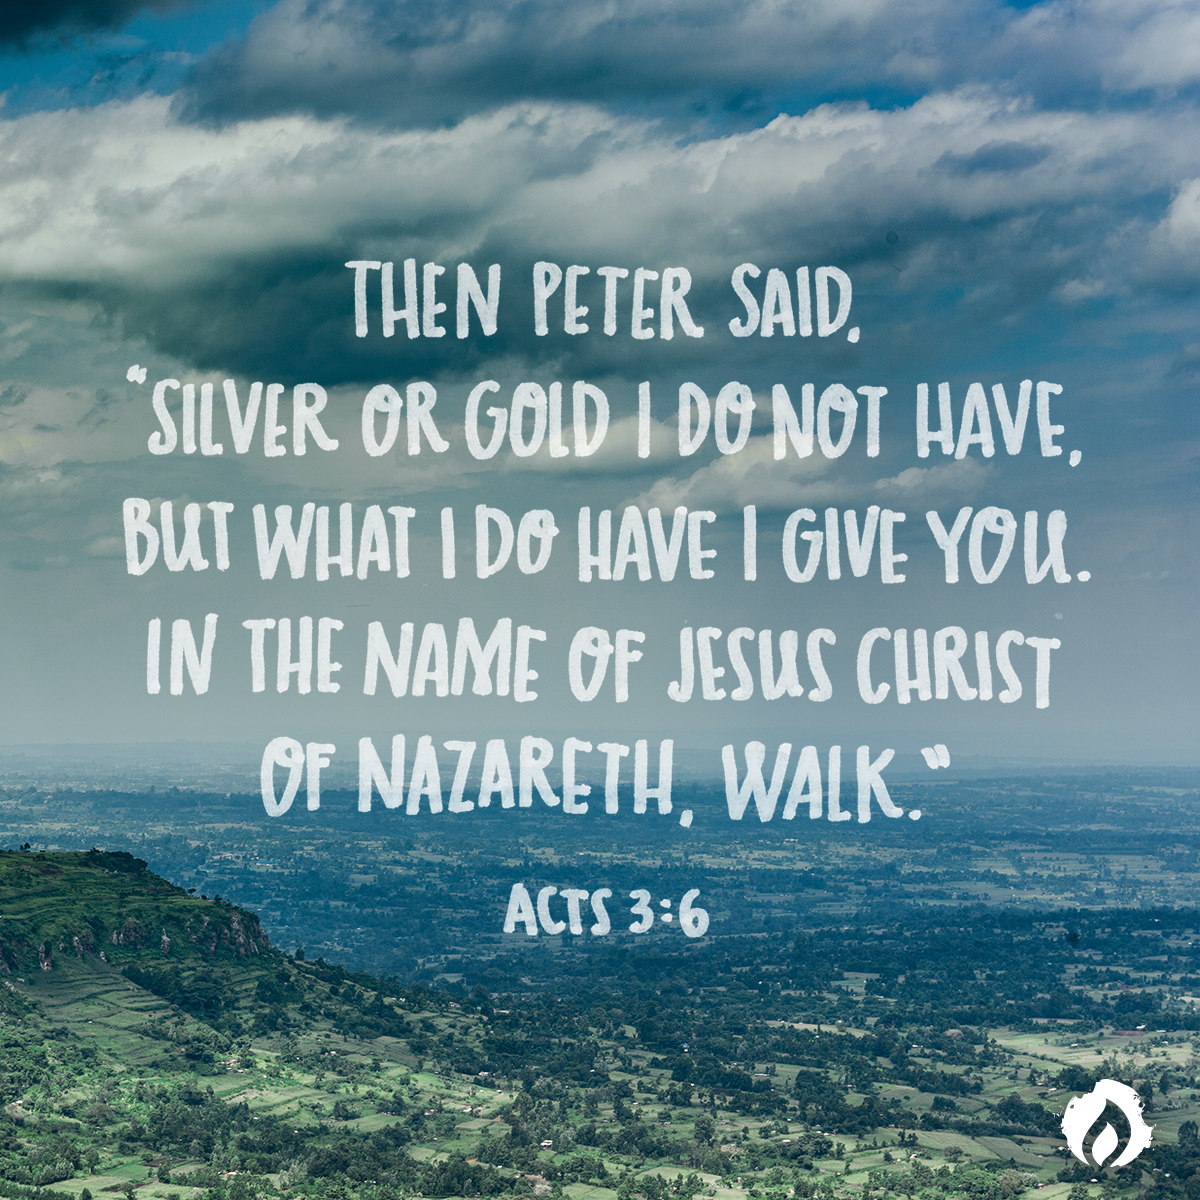 Acts 3:6